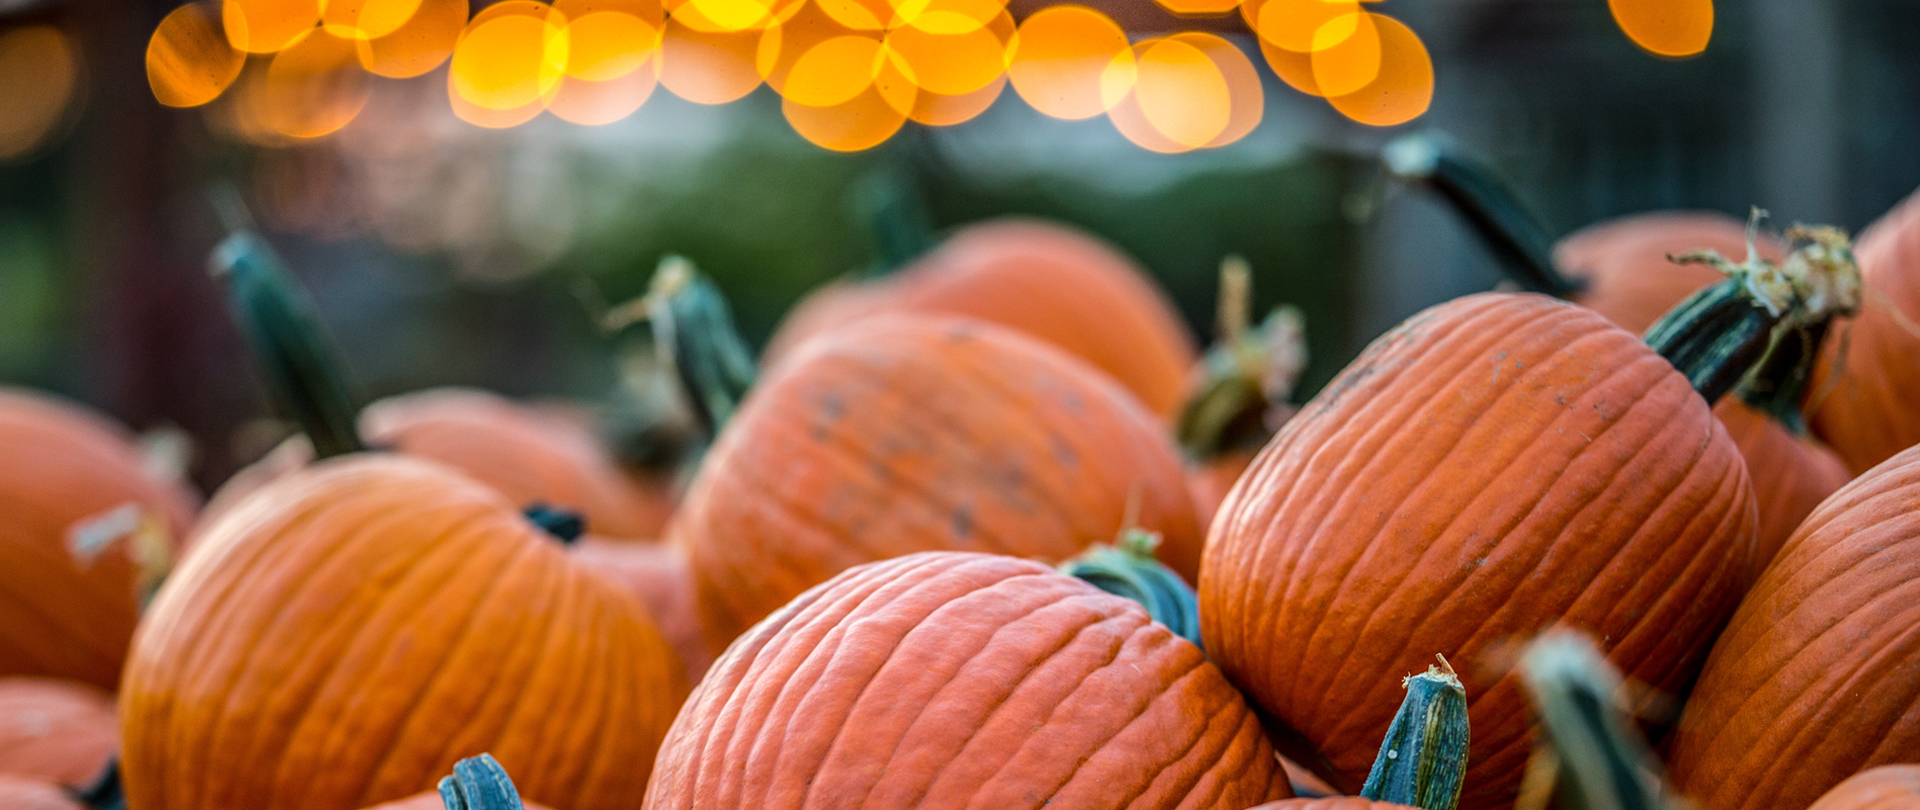 Pumpkin Night
Student Ministry
Sunday, October 22 at 6:00 PM
Check-in at the CLC
